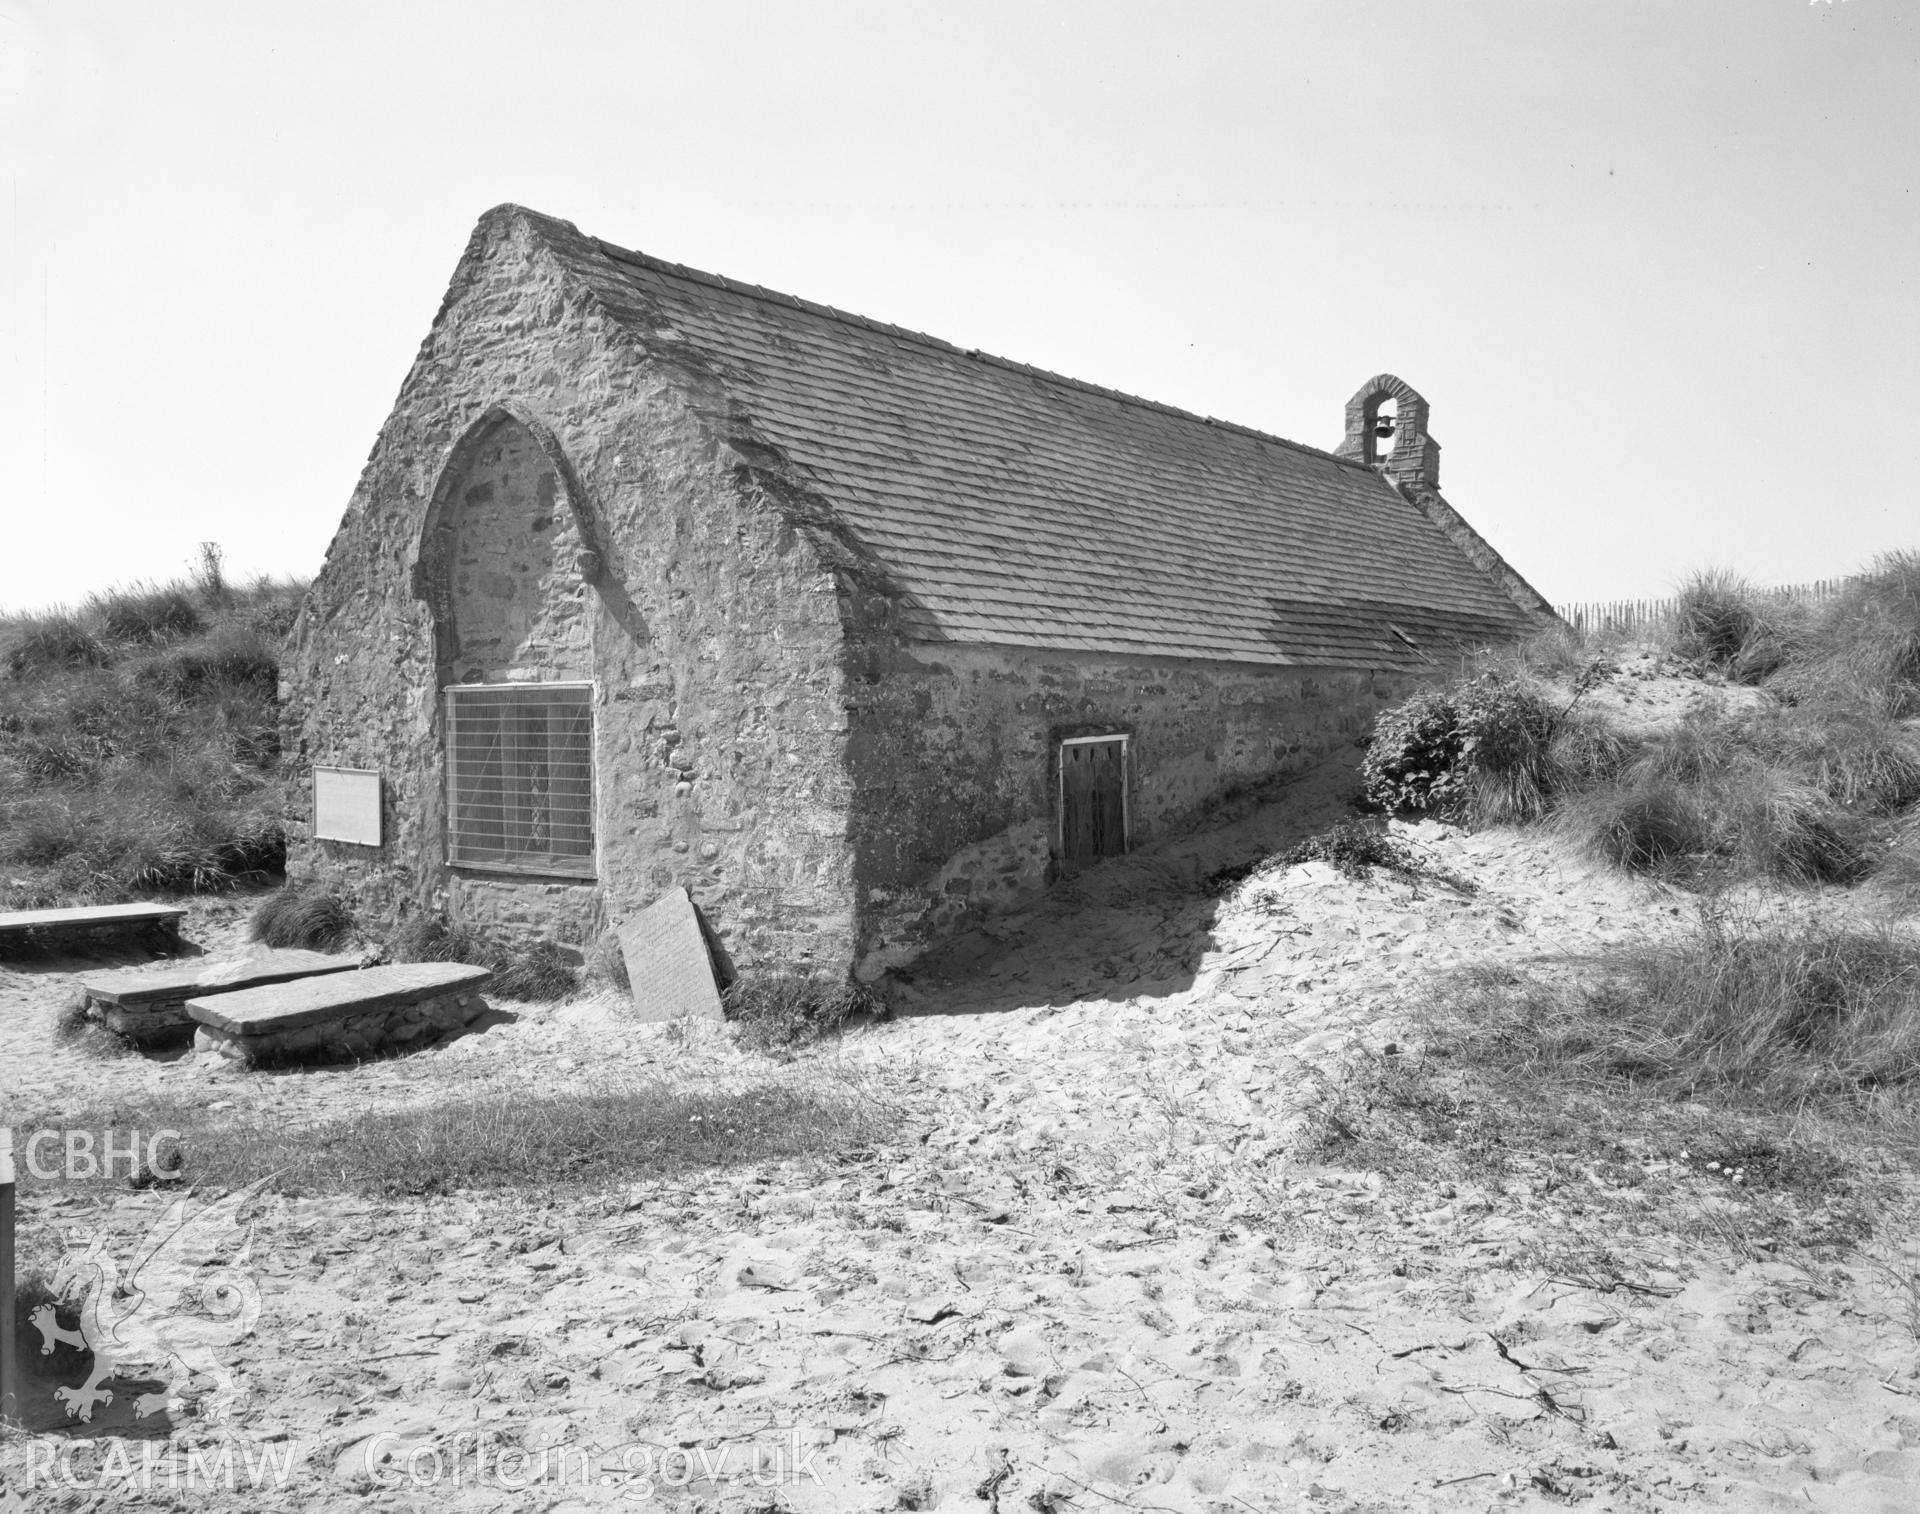 Black and white acetate negative showing exterior view of Llandanwg Church.